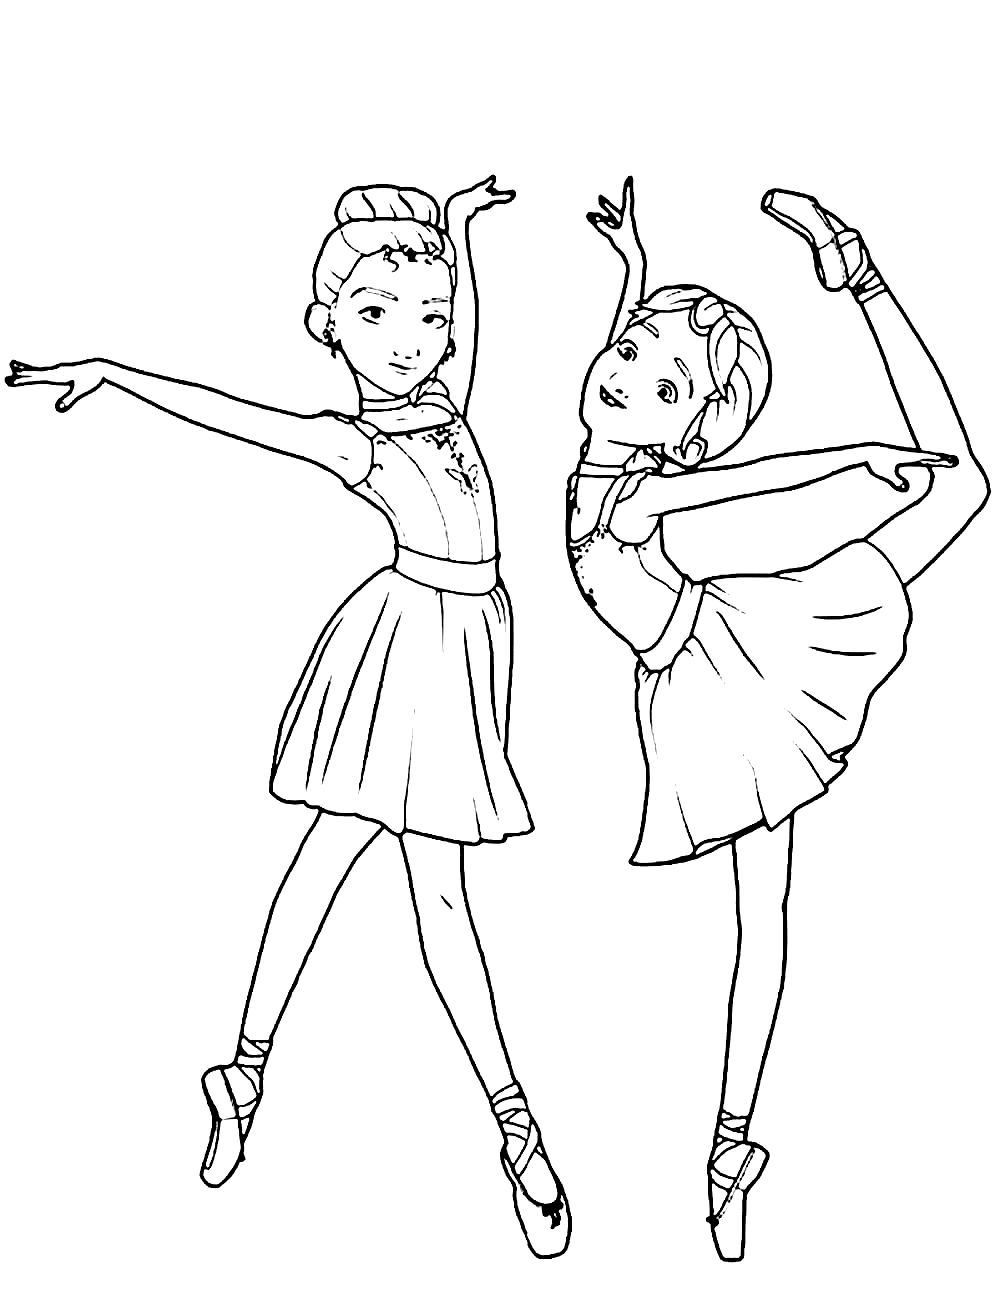 Ballerina coloring pages printable for free download